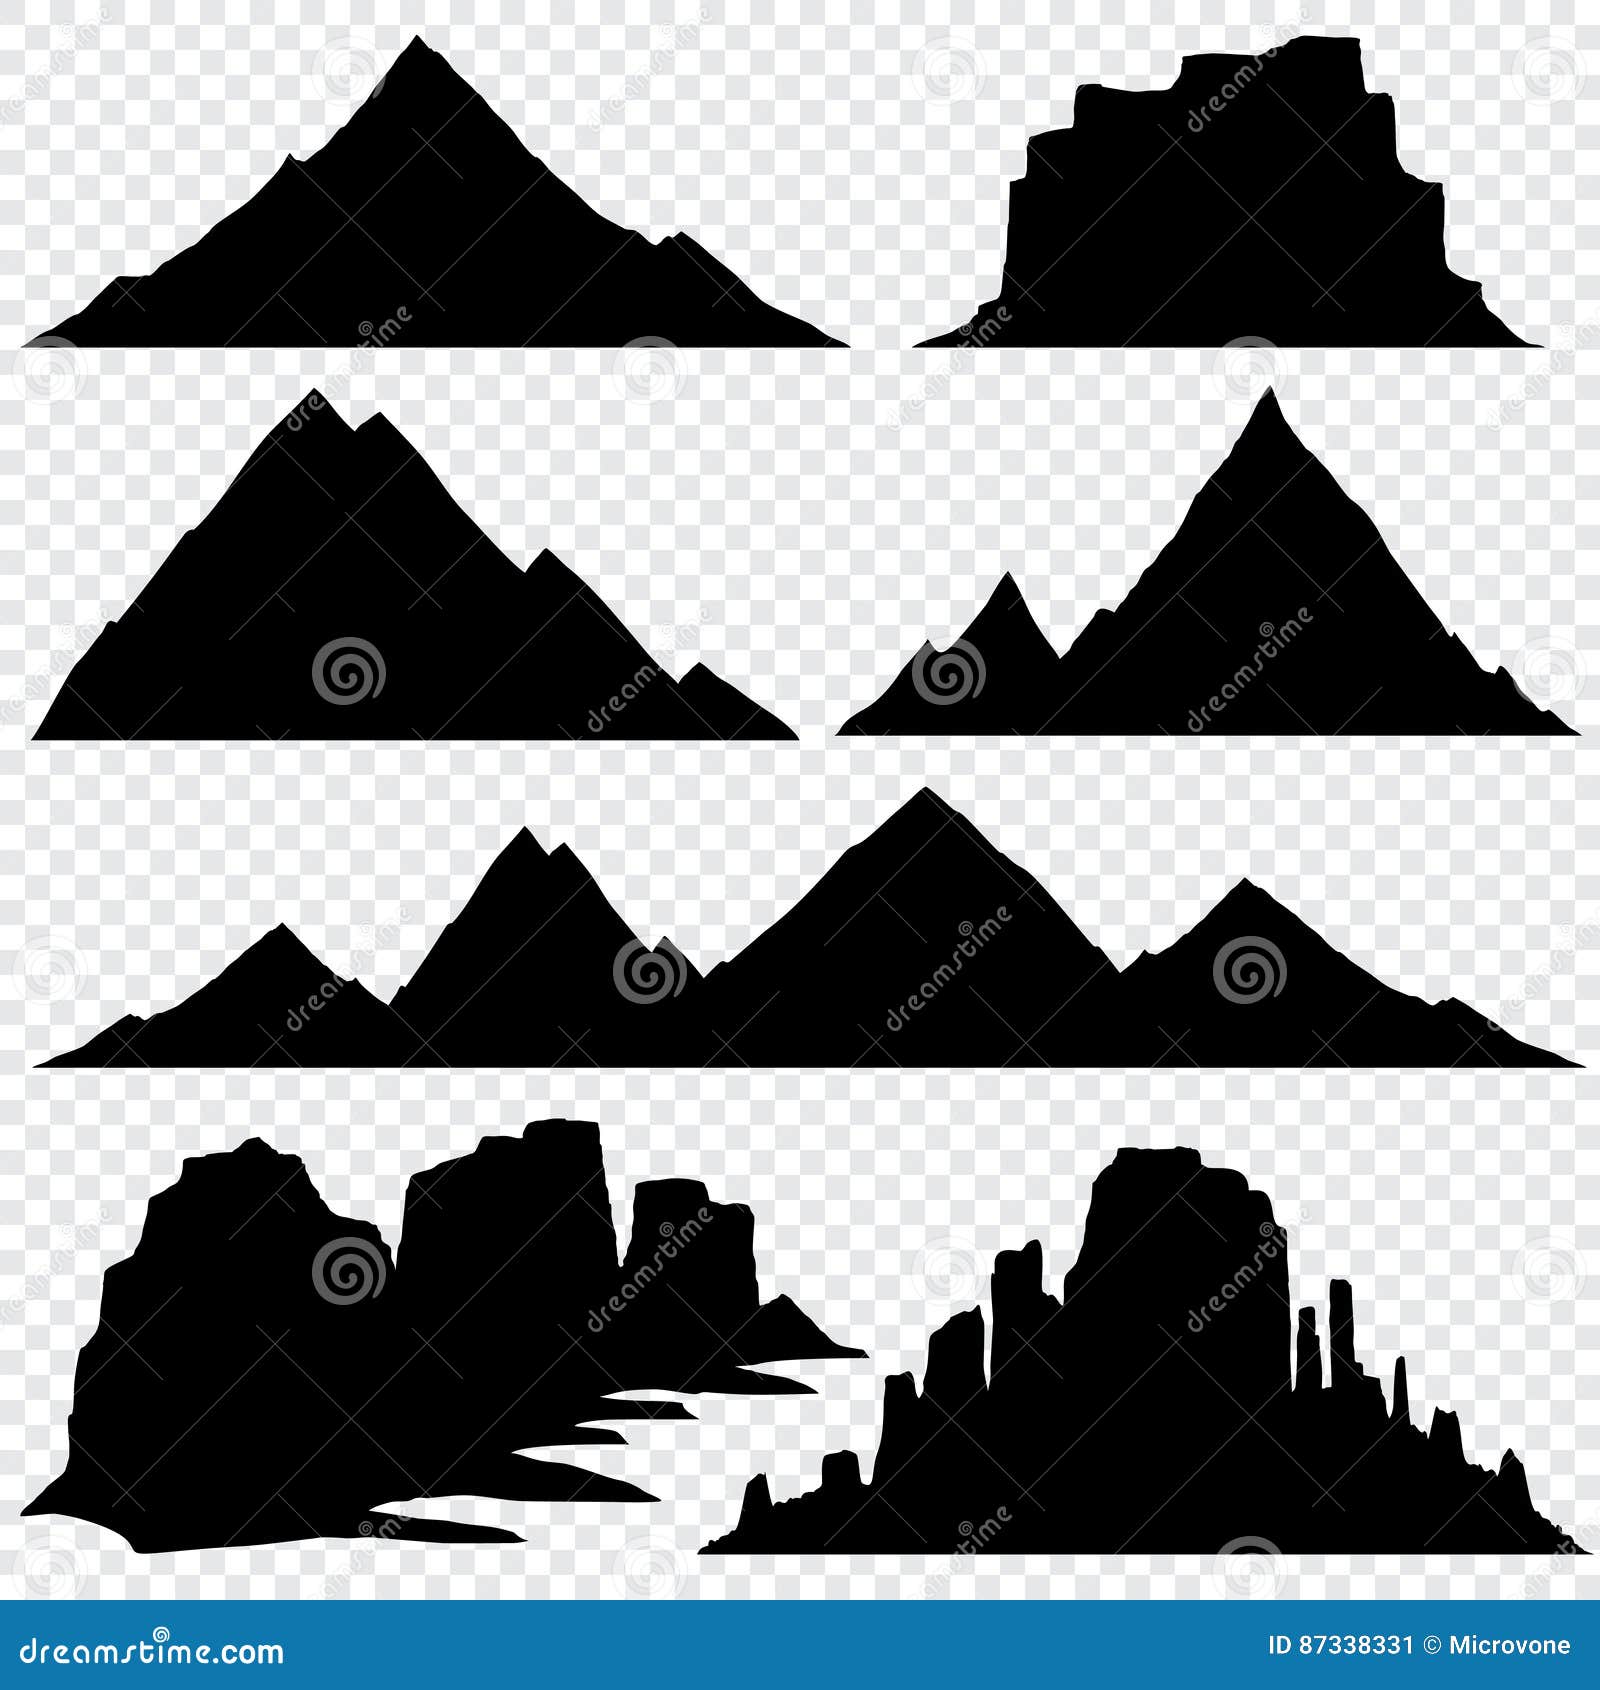 https://thumbs.dreamstime.com/z/mountain-silhouette-vector-skyline-panoramic-view-nature-hill-black-drawing-illustration-87338331.jpg